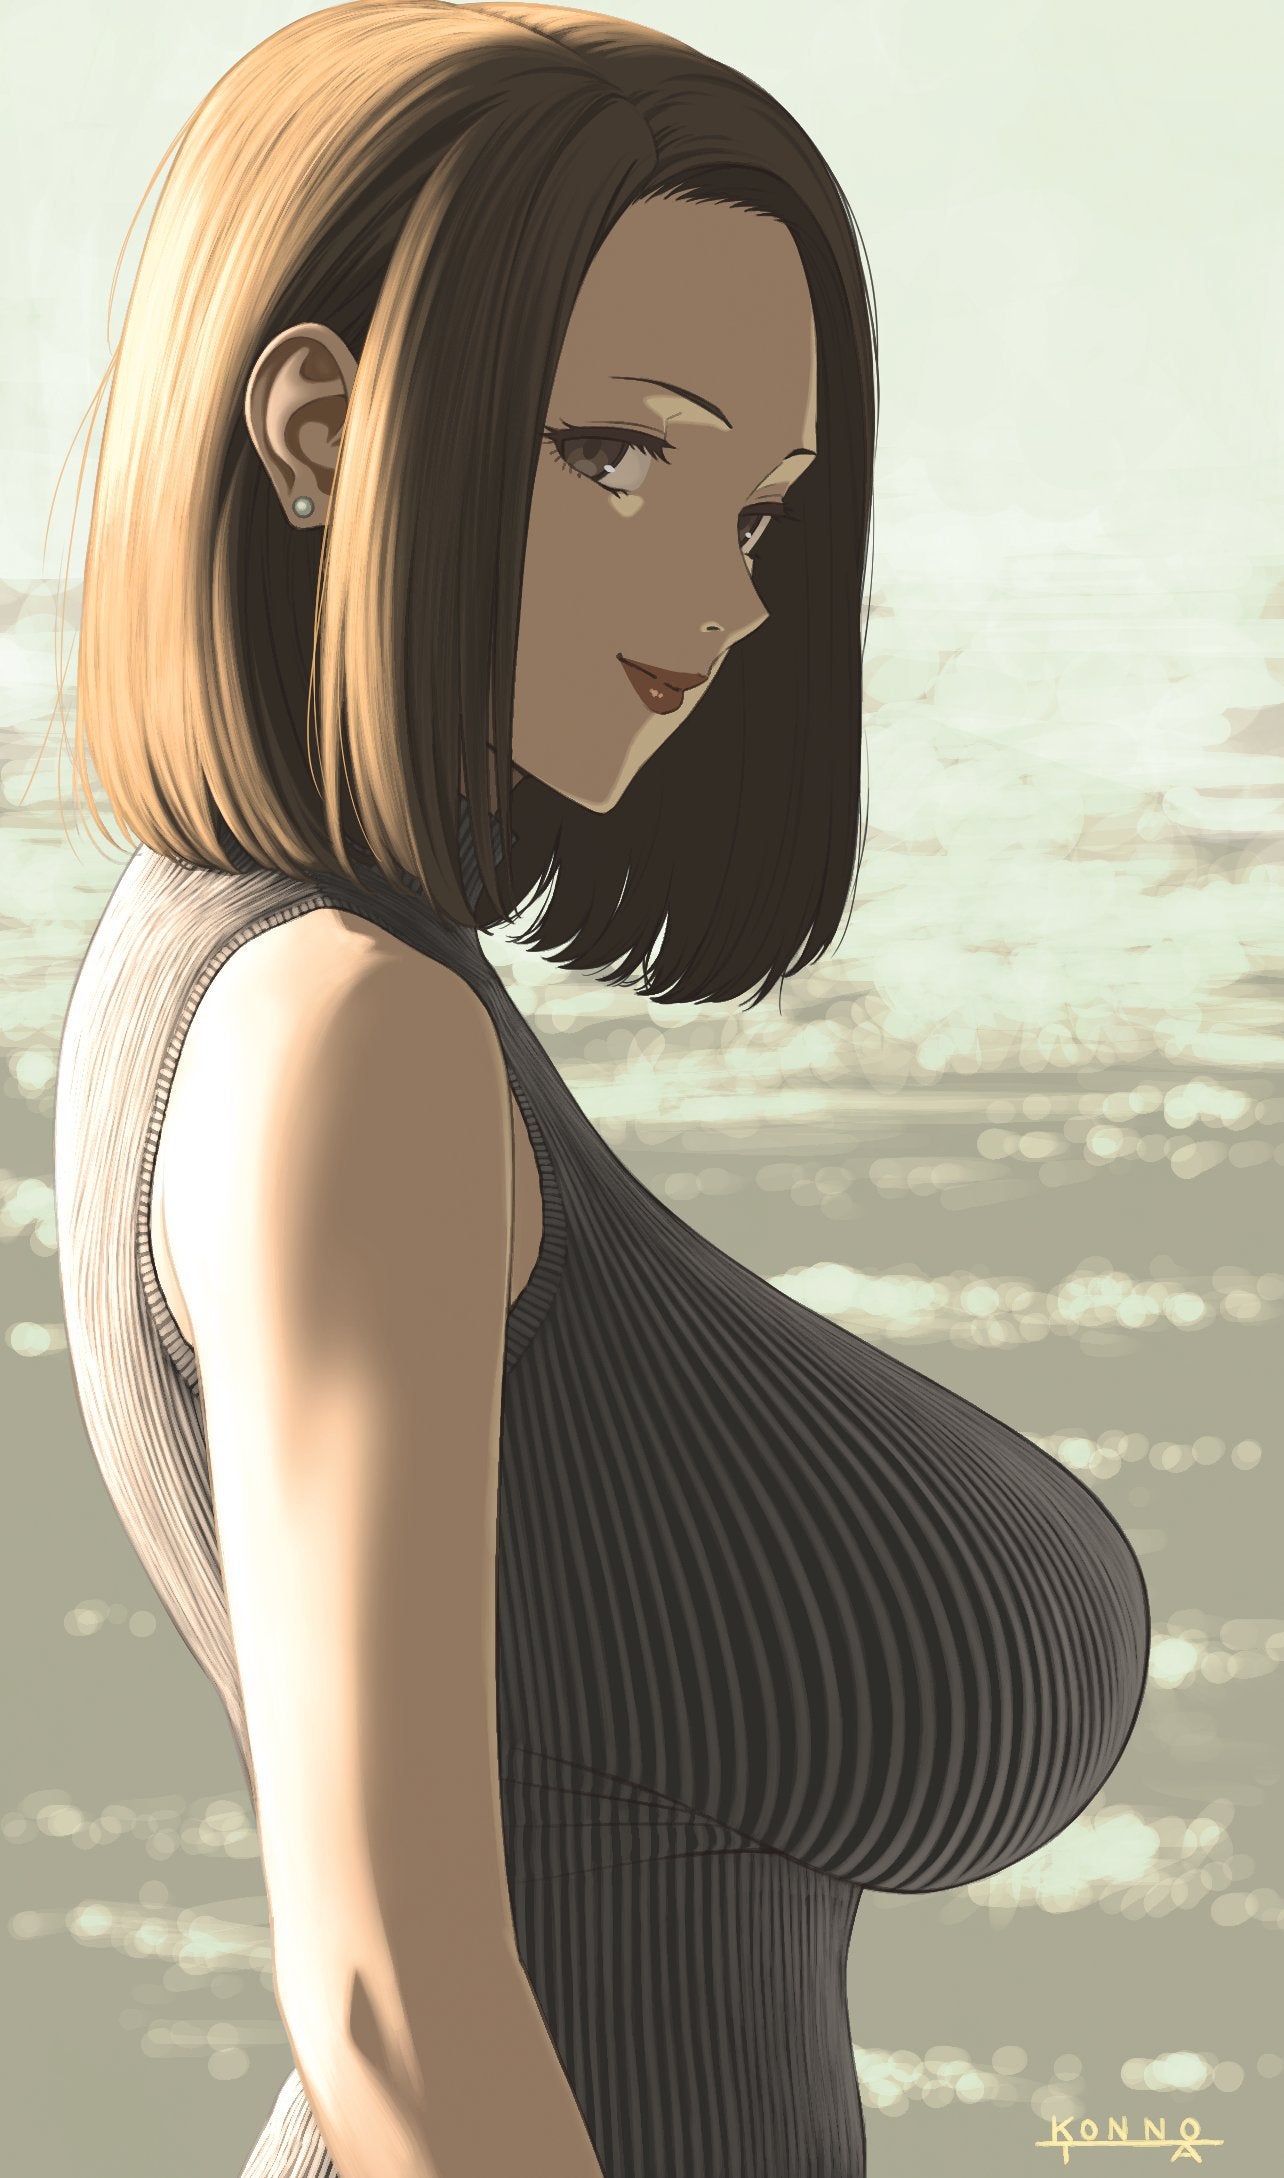 Big Boobs Short Hair Brunette Anime Girls Huge Breasts Anime 29520 Hot Sex Picture image picture